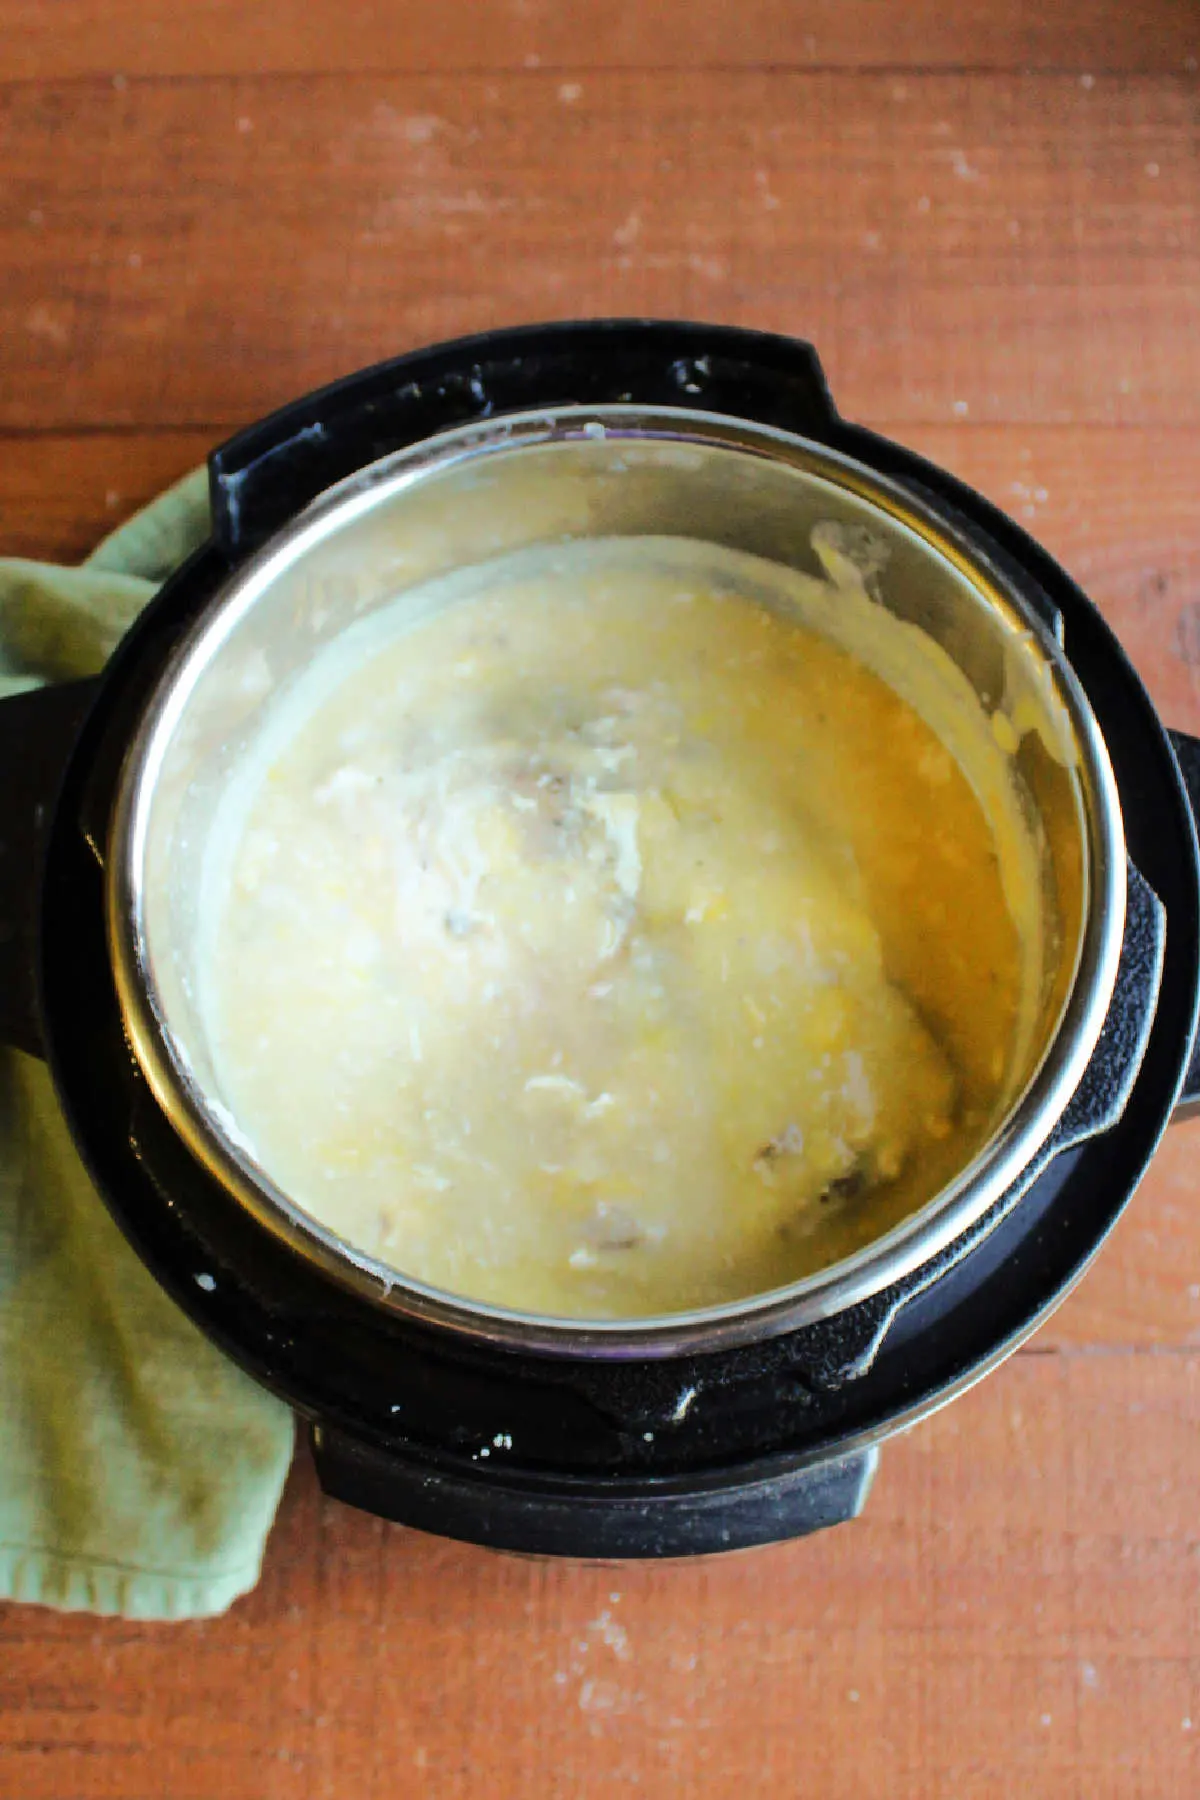 Pork loin cooked in creamy gravy inside slow cooker, ready to remove and slice. 